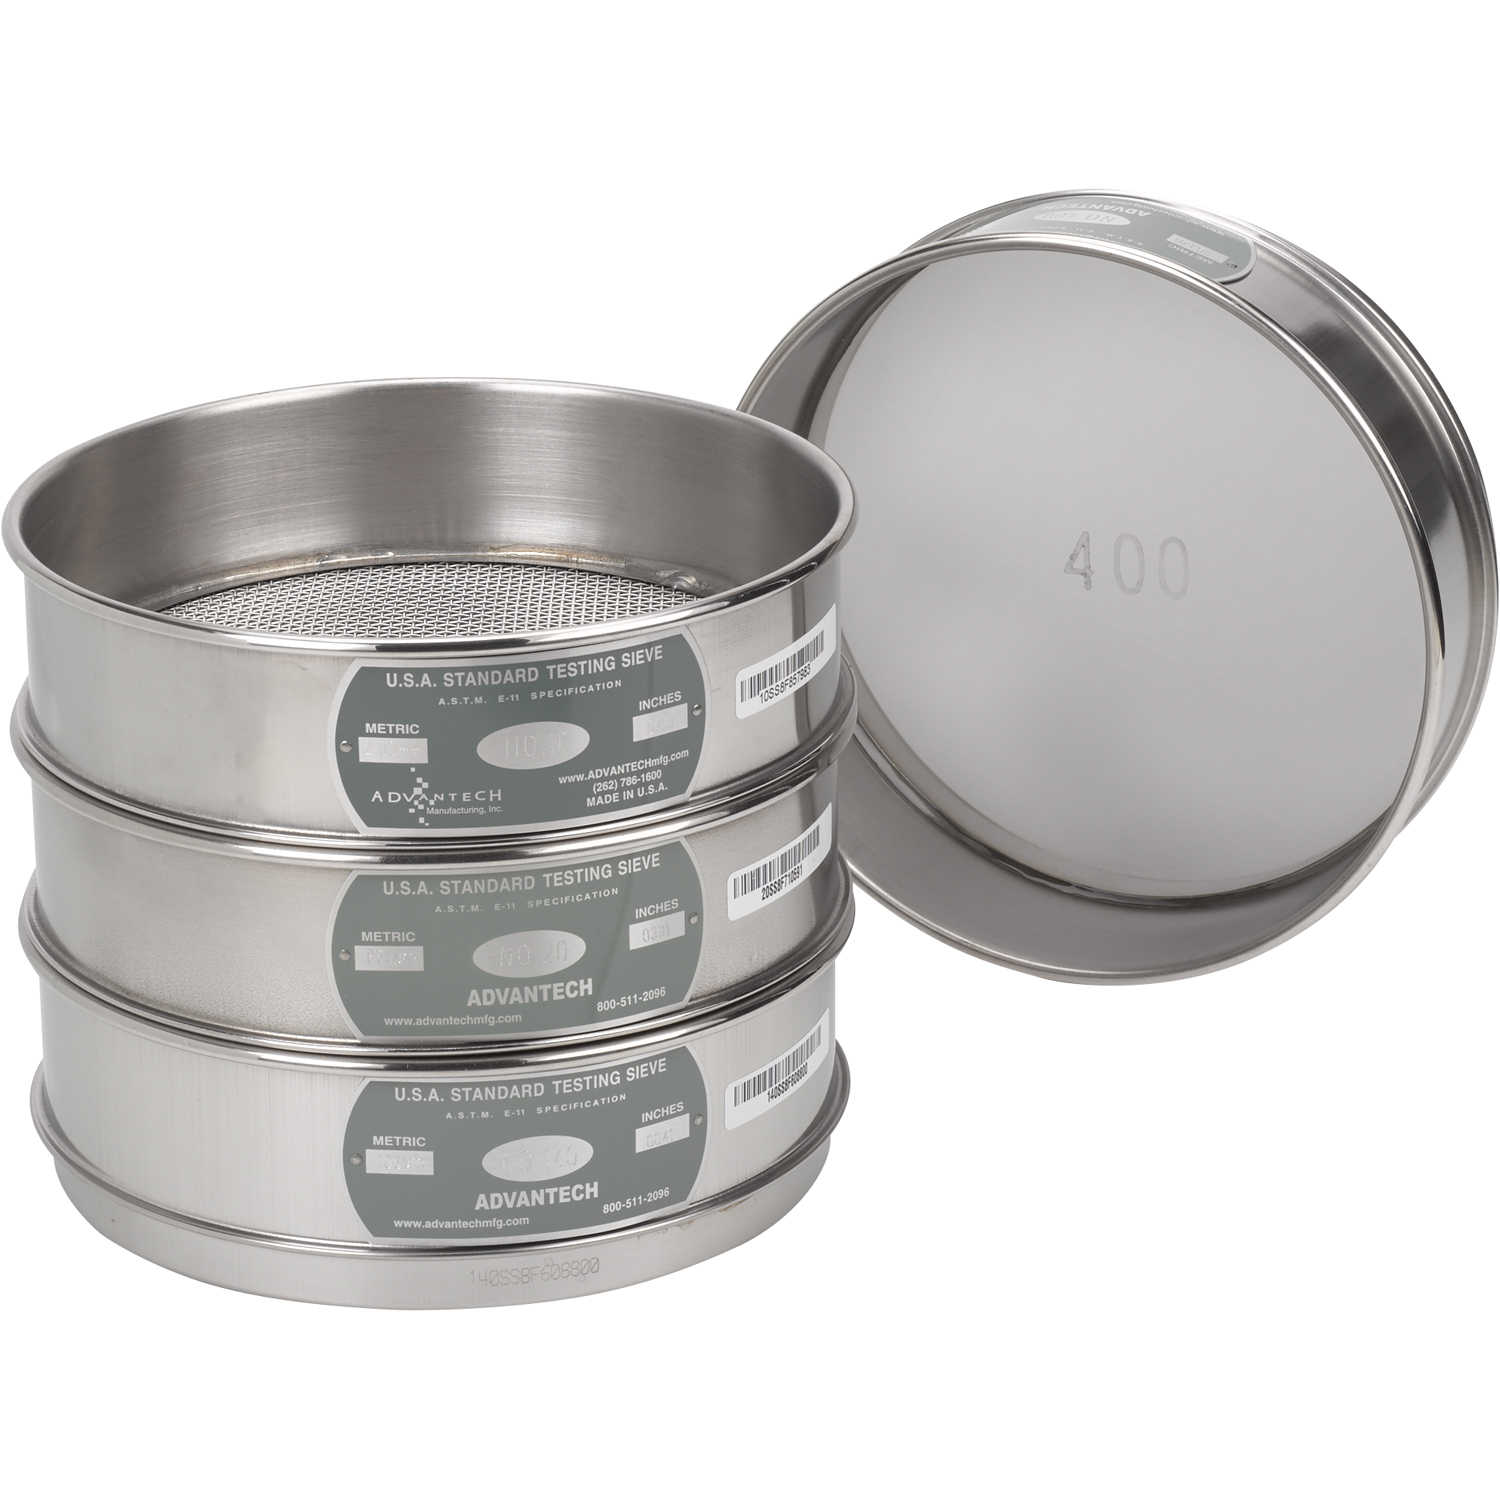 Sieves Advantech 8 Stainless Steel Testing Sieves | Forestry Suppliers, Inc.